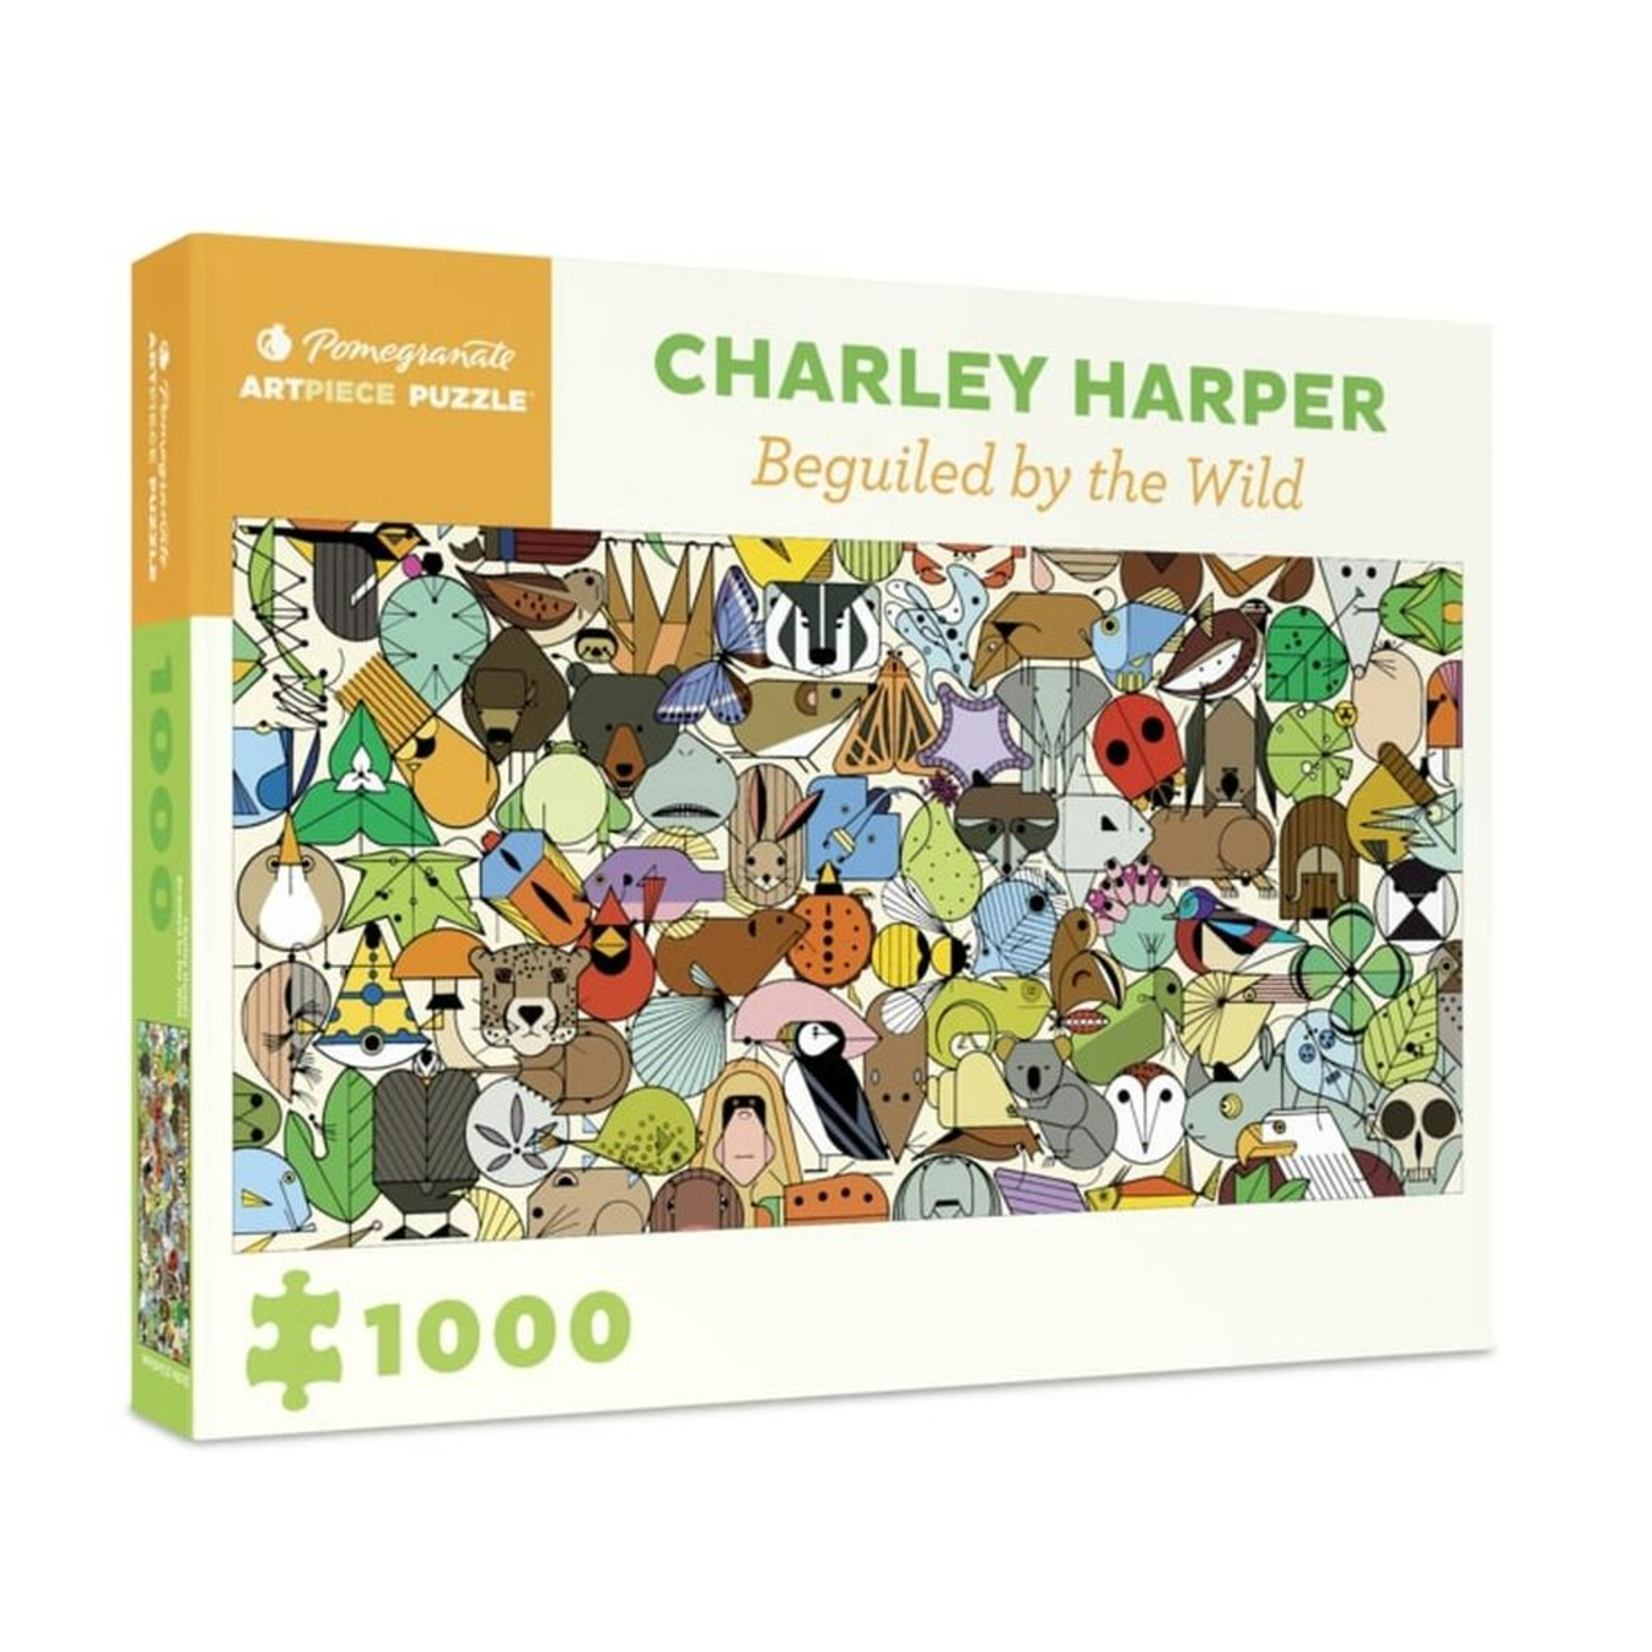 Pomegranate Communications 1000 pc Puzzle Charley Harper Beguiled by Wild